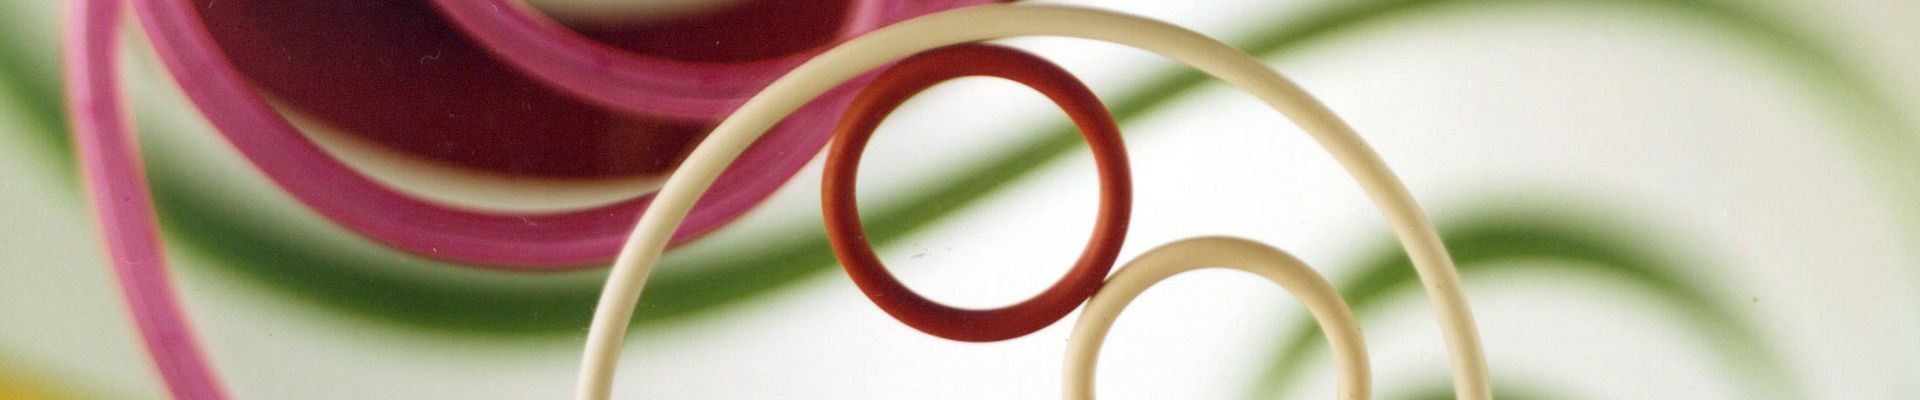 Molded SILASTIC fluorosilicone rubber parts, including O-rings, weatherseals, electronic connector insulators and sparkplug boots. 